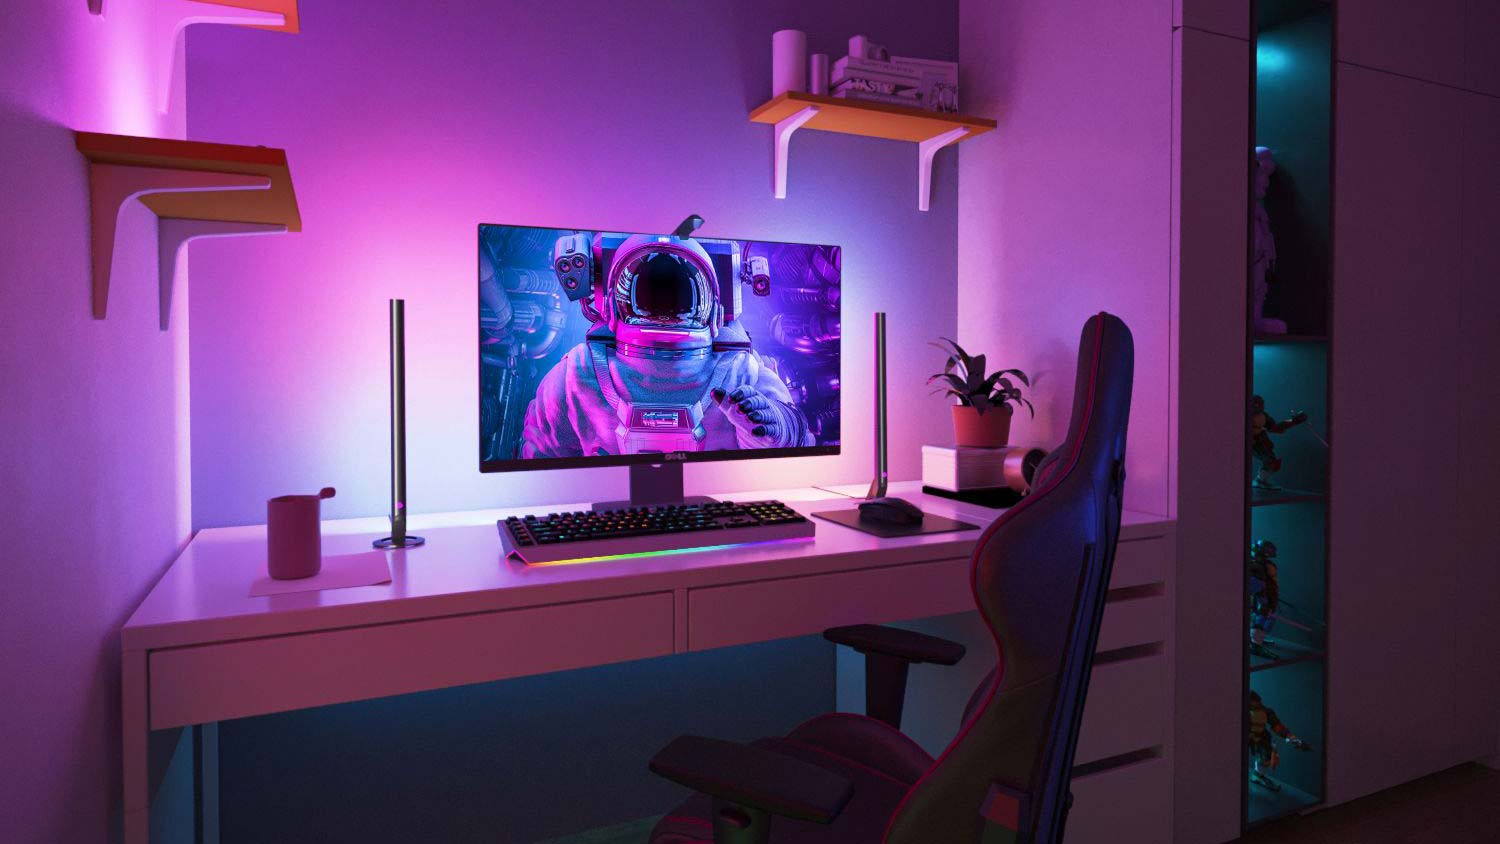 Govee DreamView G1 Pro Gaming Light review: A good Philips Hue alternative?